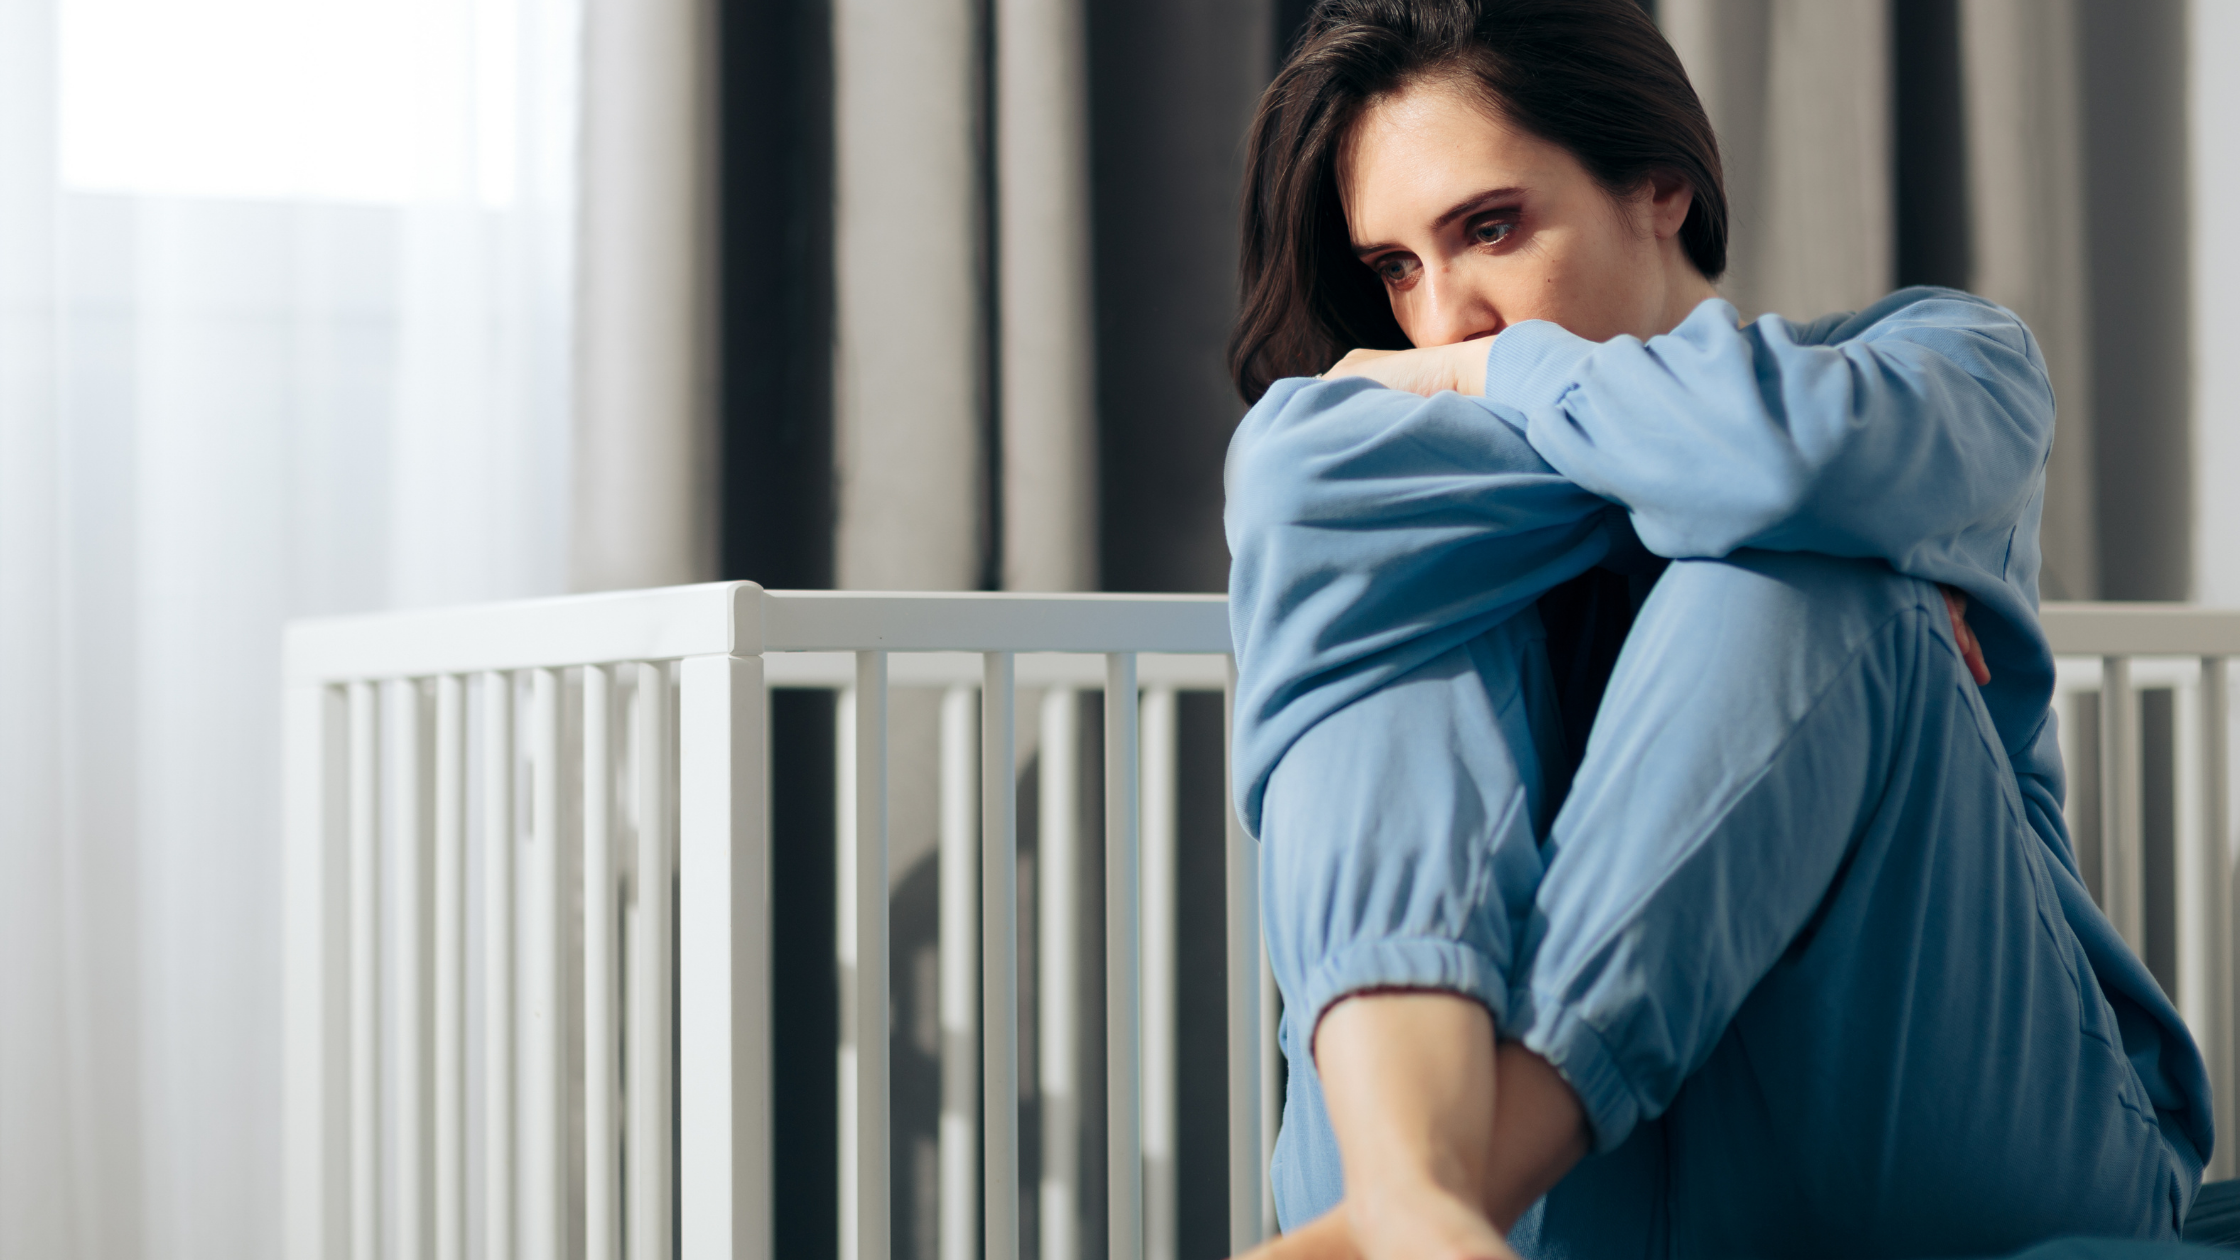 How Pregnancy Impacts Your Mental Health